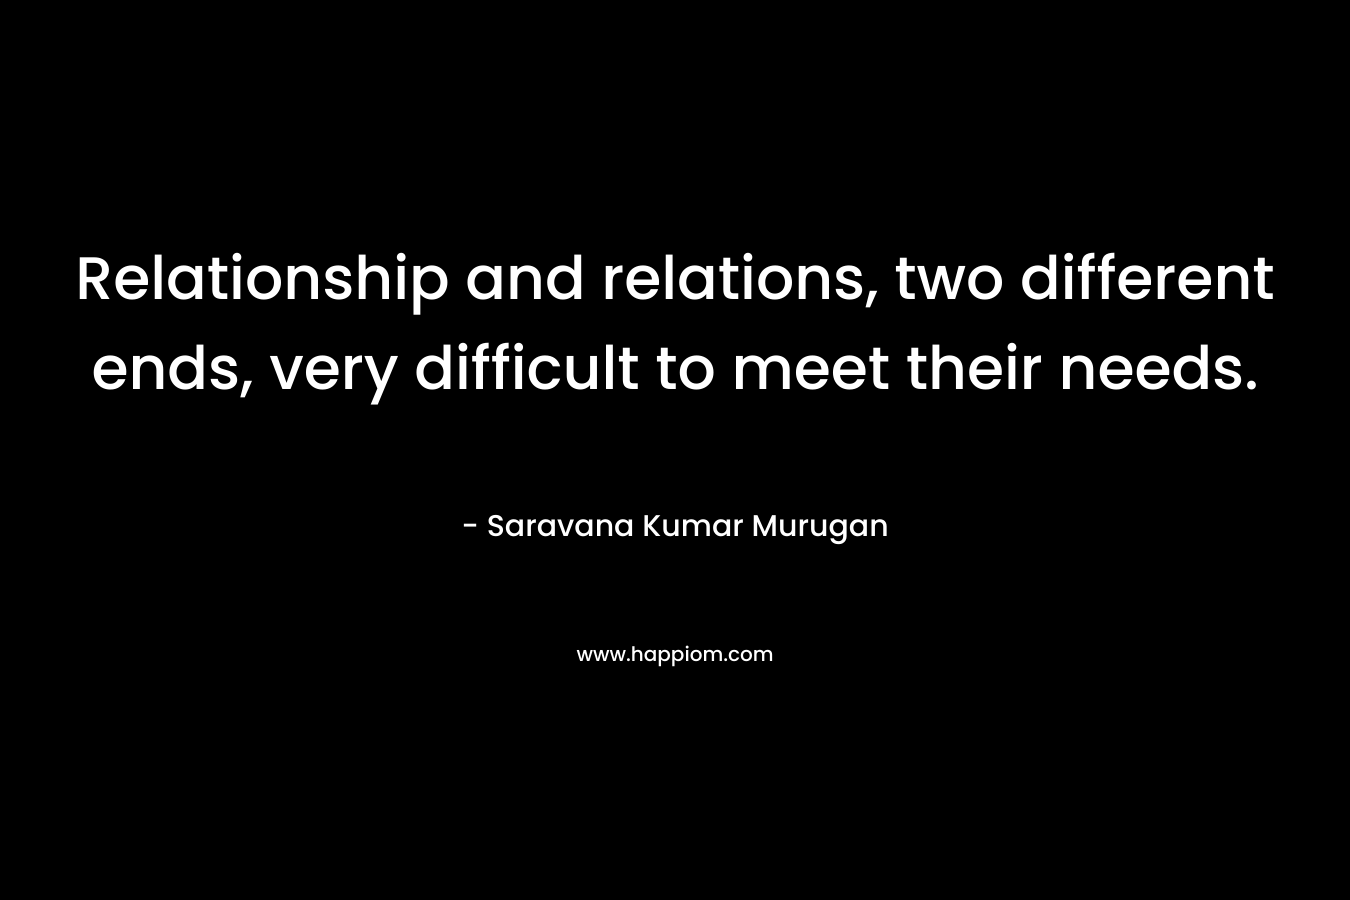 Relationship and relations, two different ends, very difficult to meet their needs.